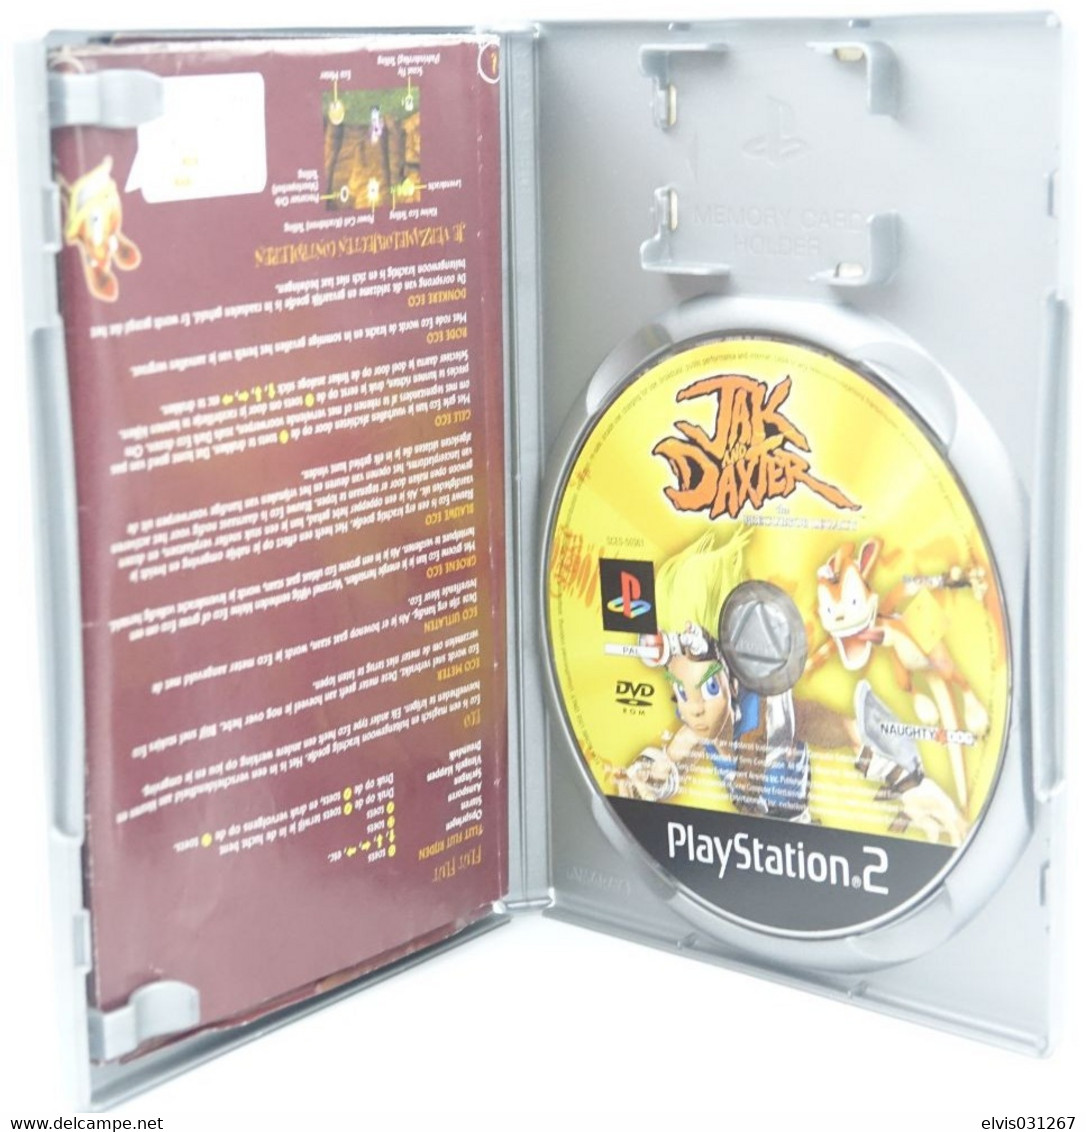 SONY PLAYSTATION TWO 2 PS2 : JAK AND DEXTER THE PRECURSOR LEGACY - NAUGHTY DOG - Playstation 2